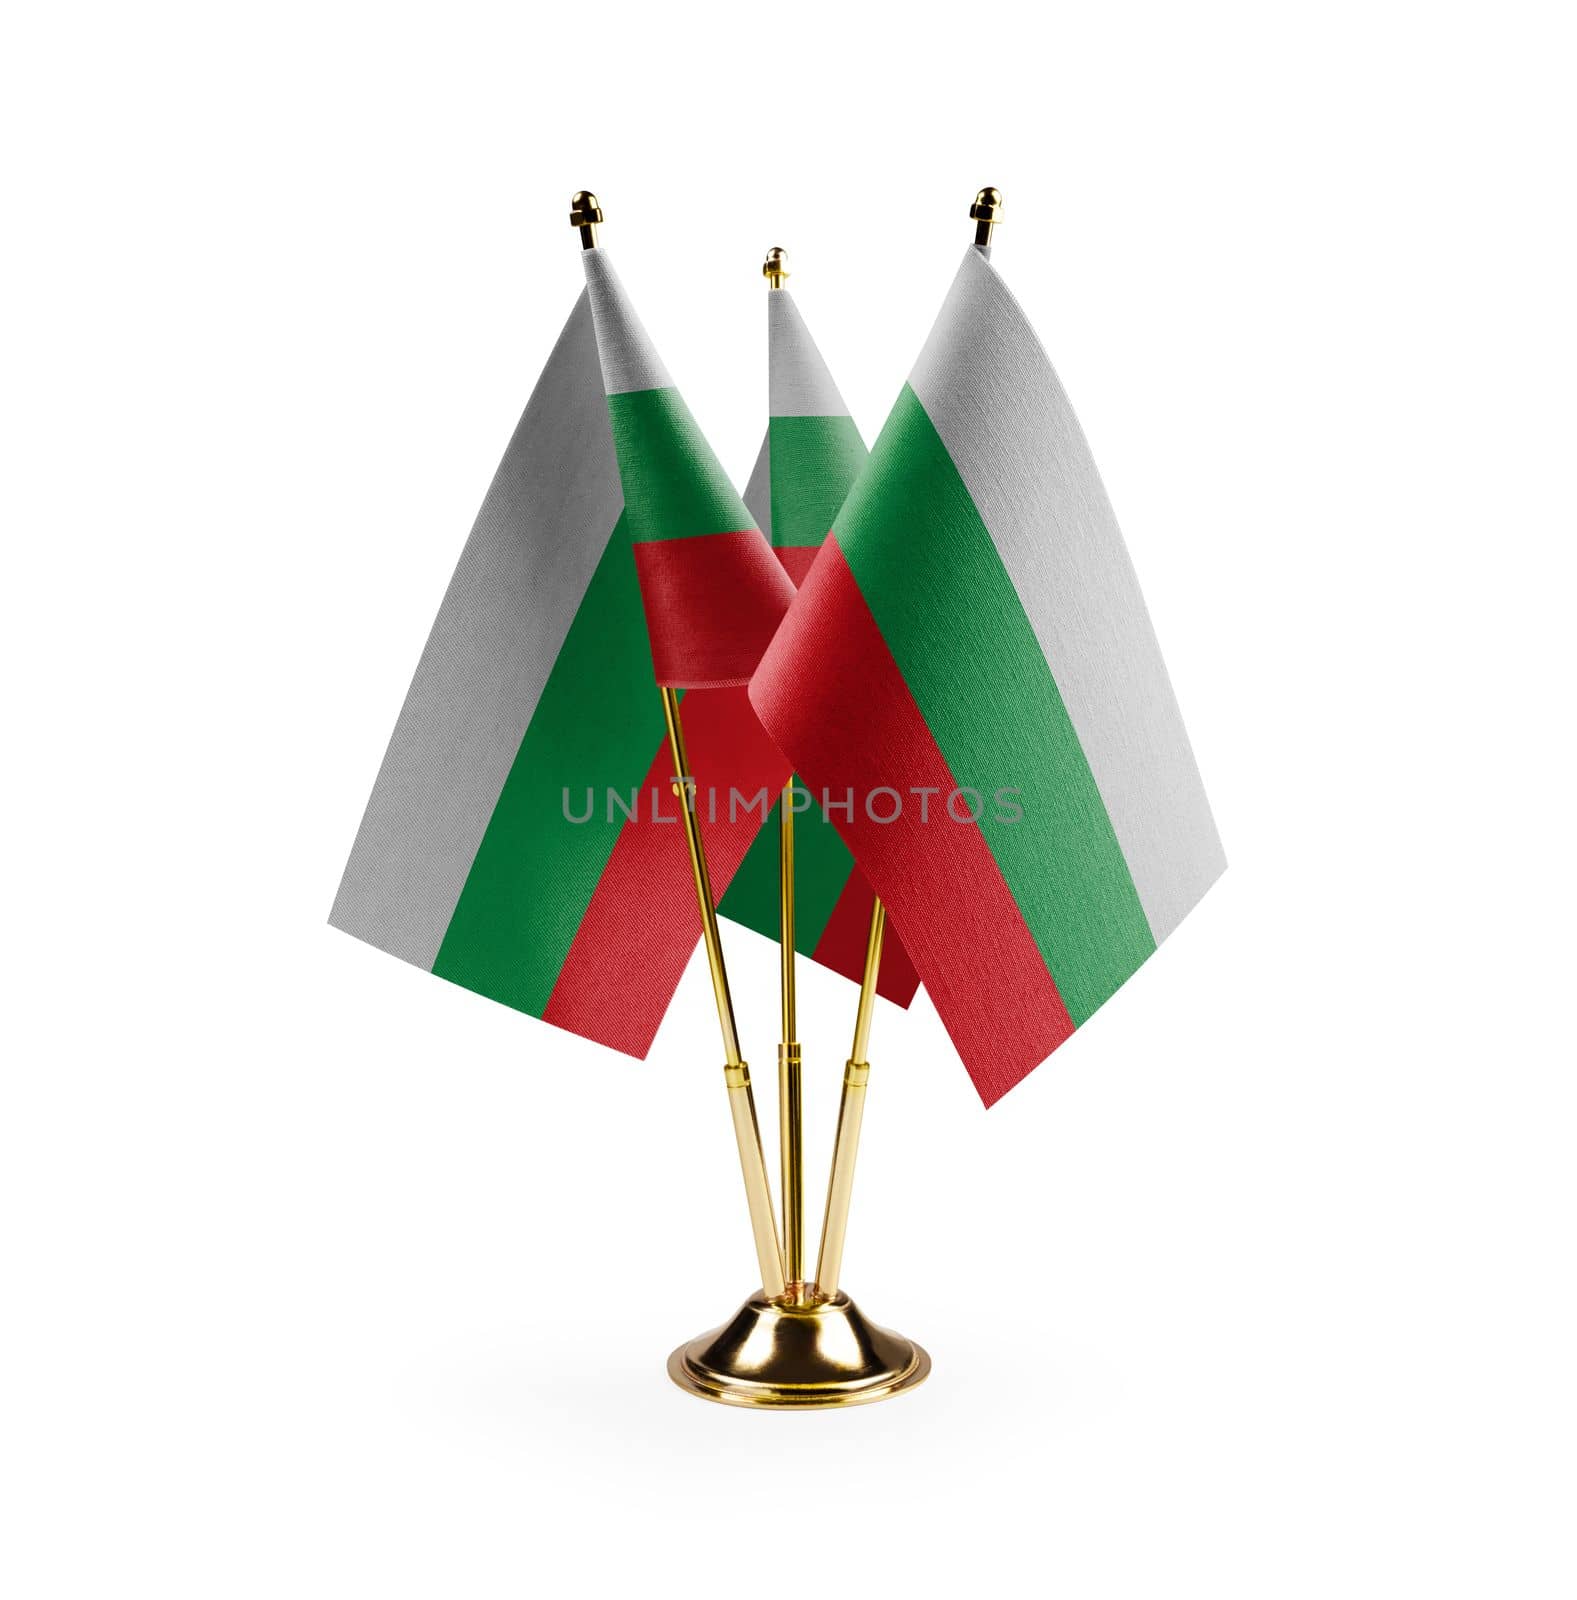 Small national flags of the Bulgaria on a white background by butenkow